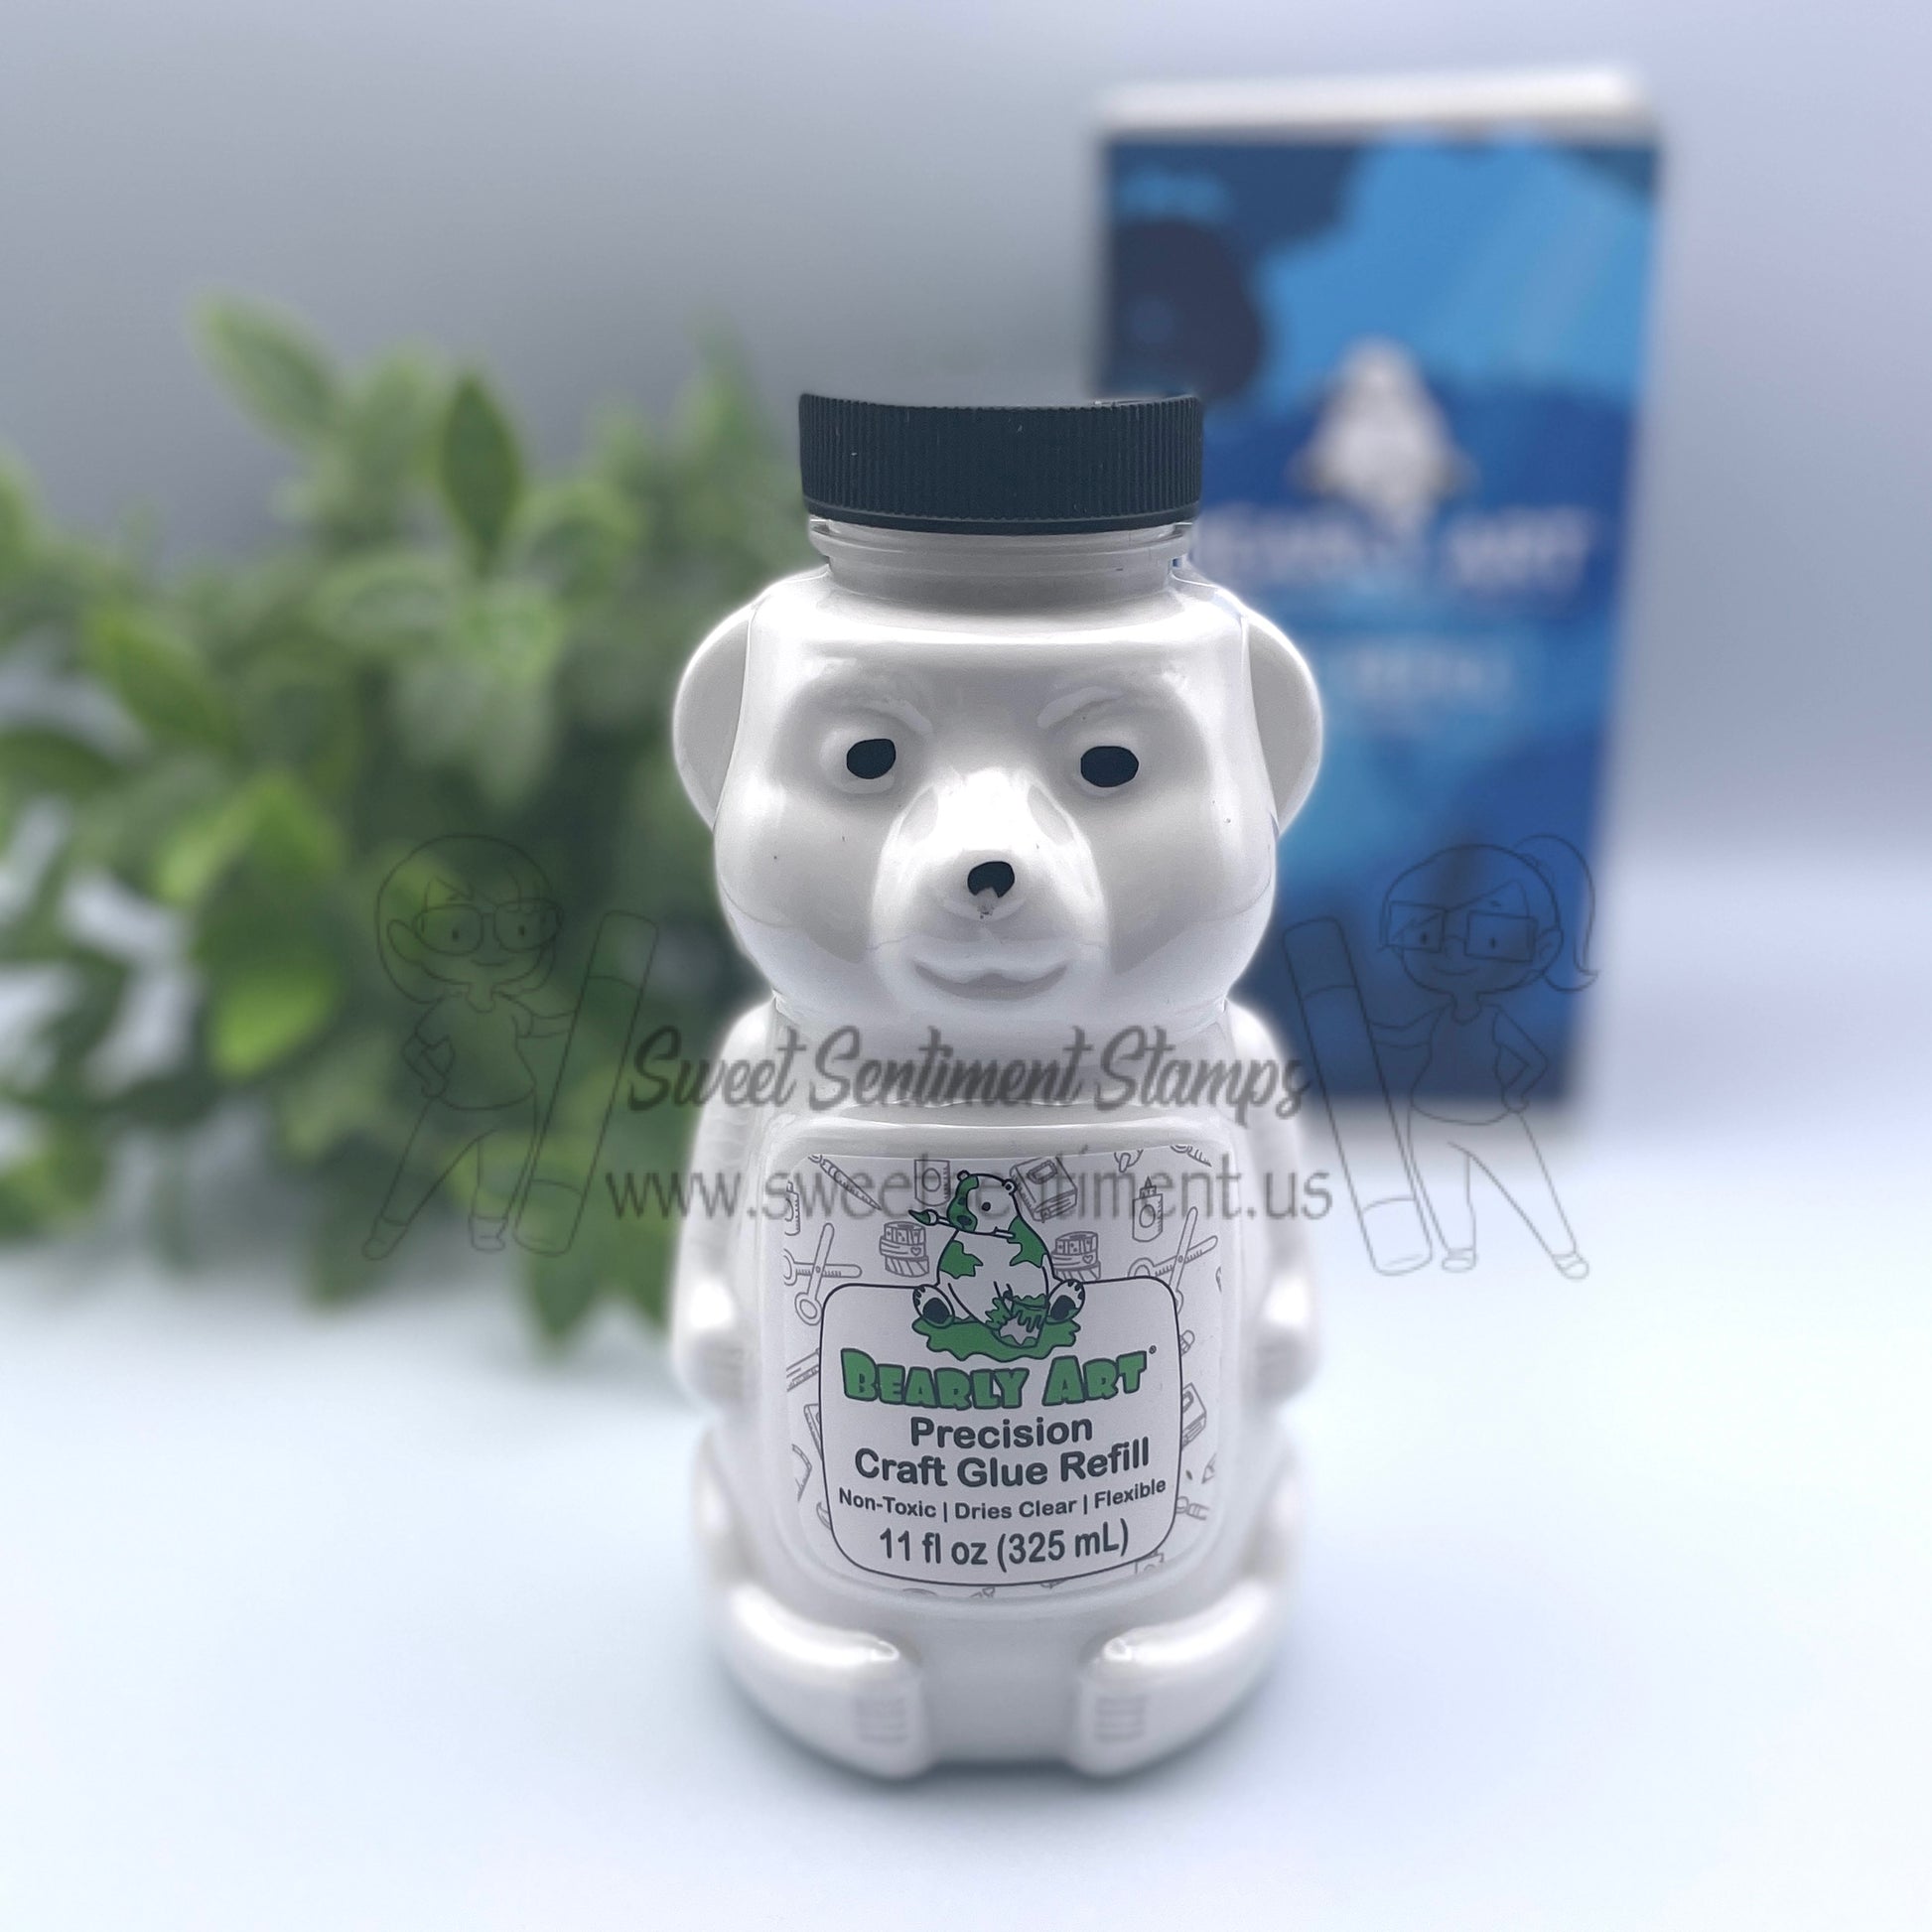 How to use Bearly Art craft glue precision tips